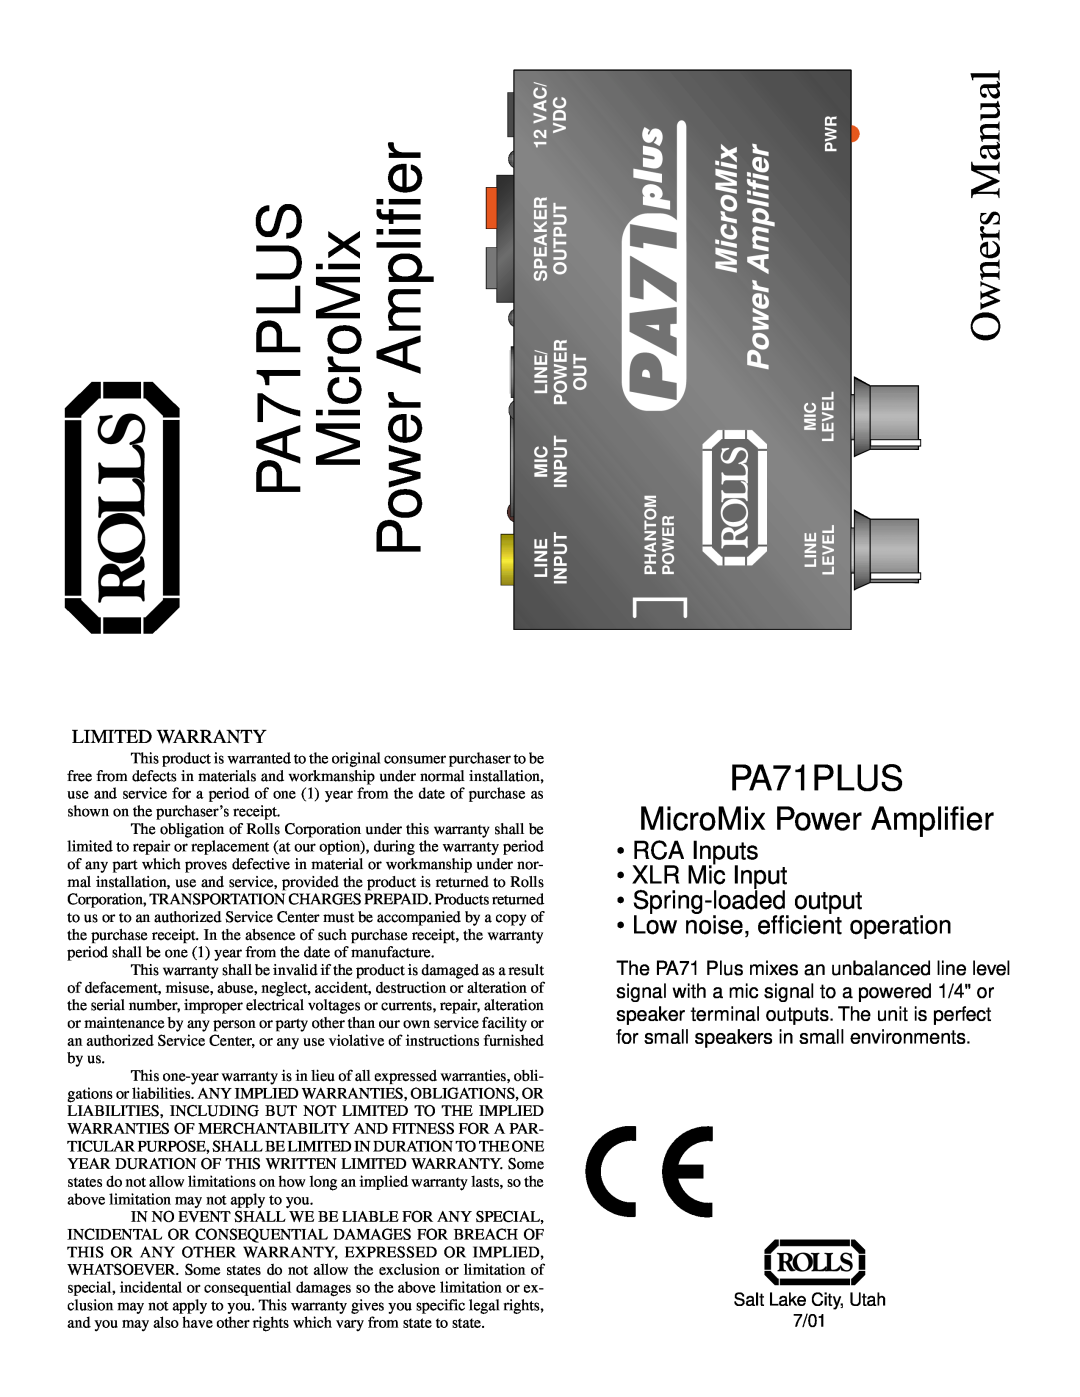 Rolls PA71PLUS owner manual MicroMix Power Amplifier, RCA Inputs XLR Mic Input Spring-loadedoutput, 12 VAC, Output 